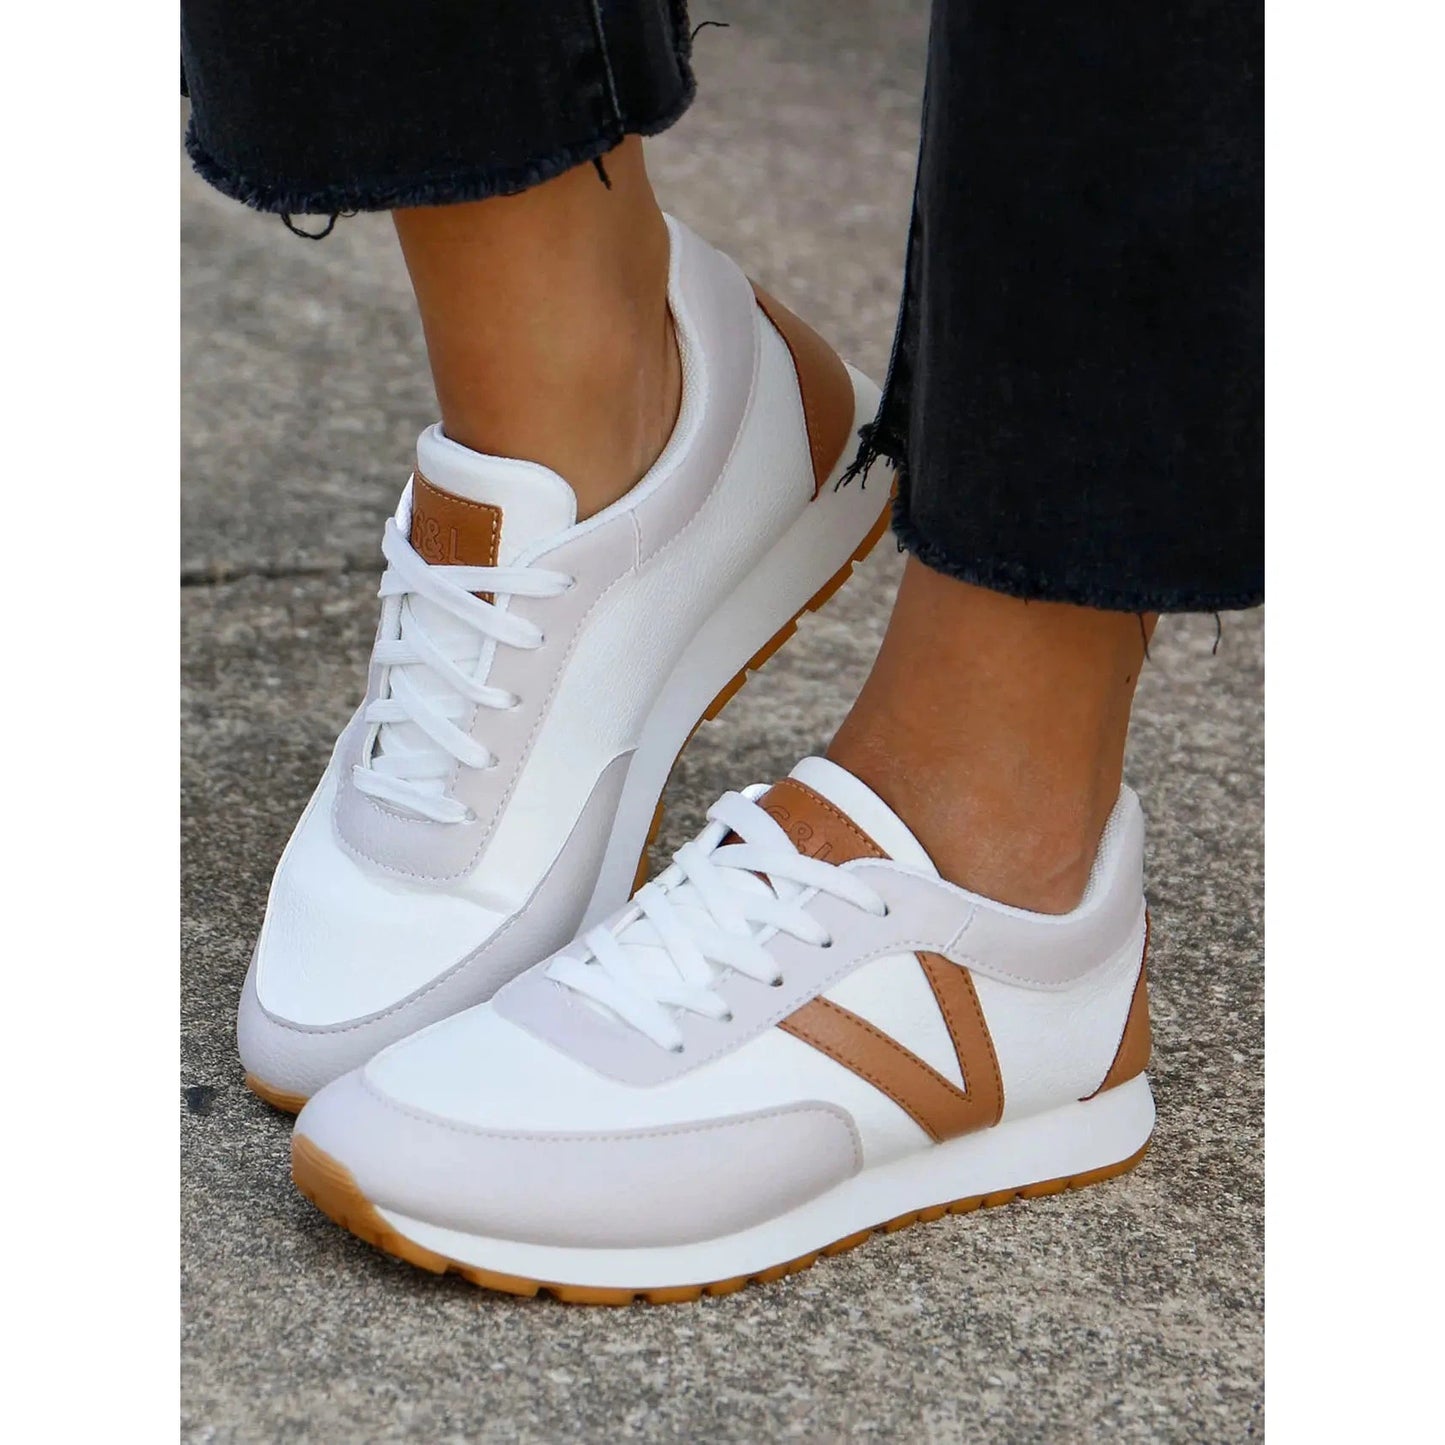 White Tennis Shoes for Women